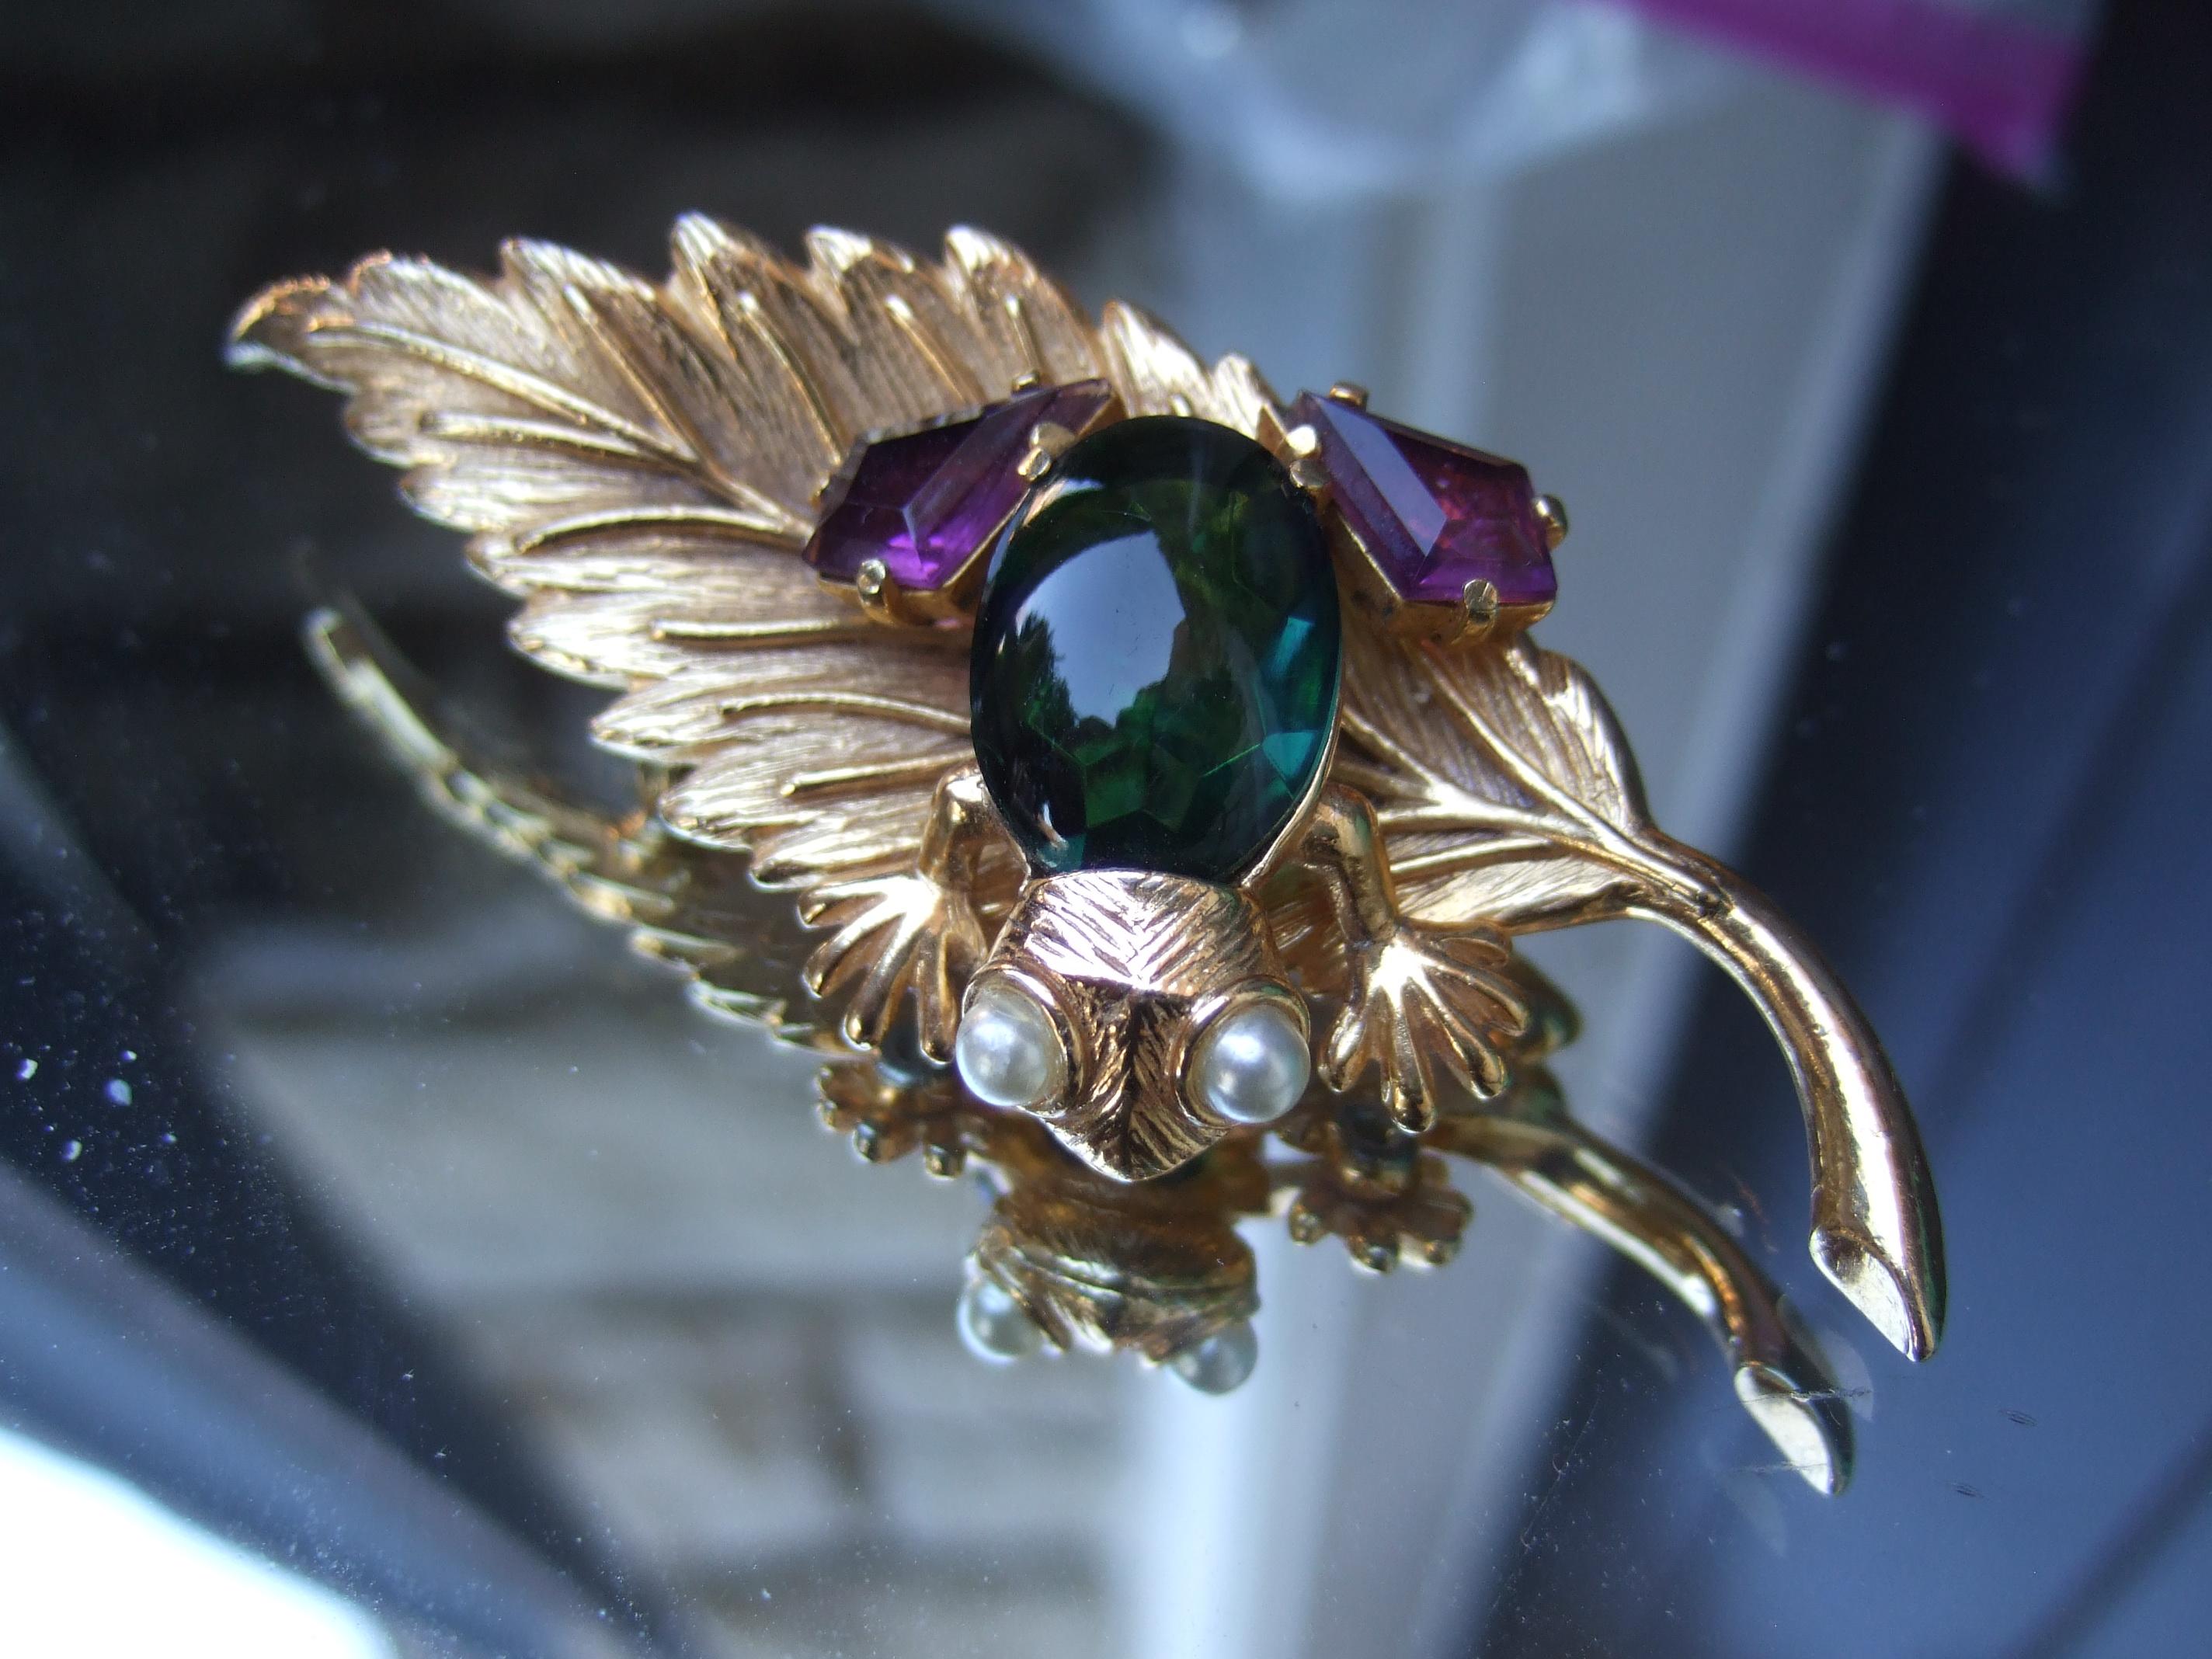 Women's Schiaparelli Rare Charming Jeweled Frog Brooch c 1960 For Sale